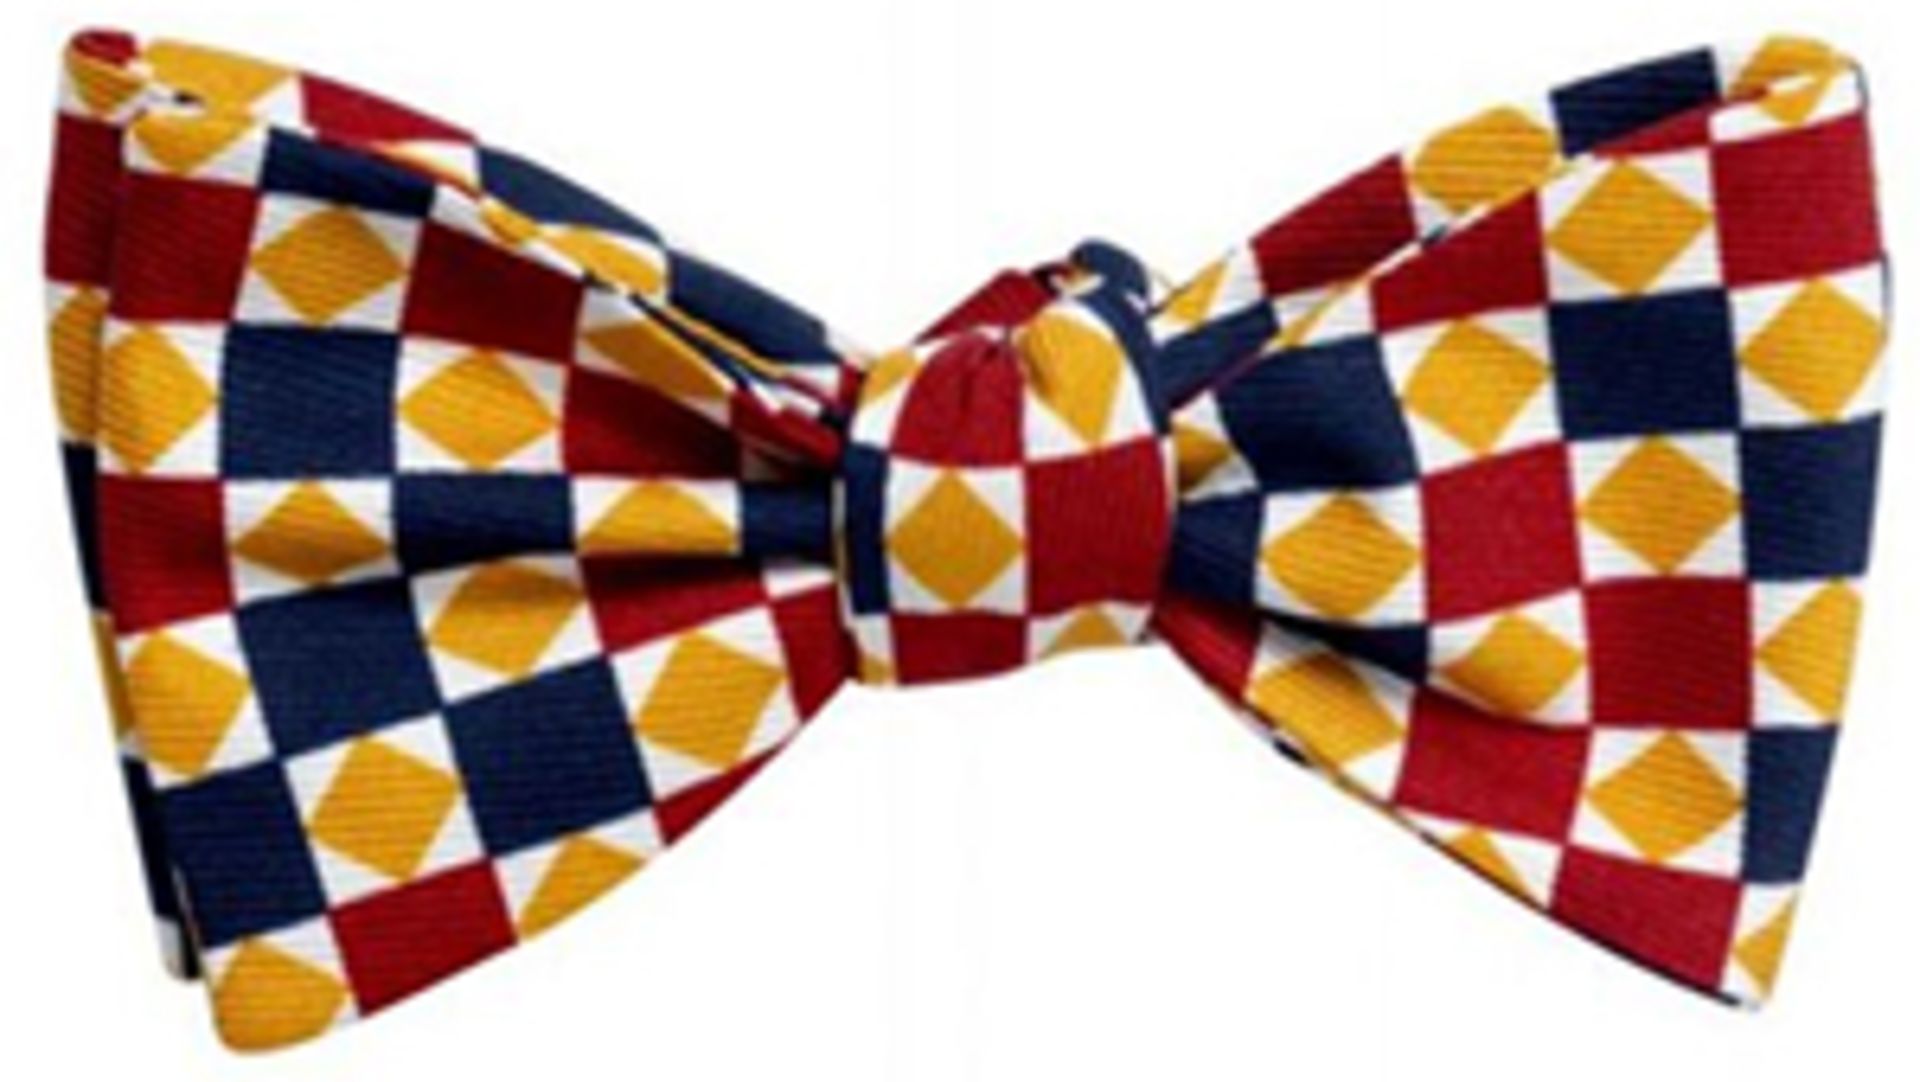 ROMA MOSAIC BOW TIE MOSAICS CELEBRATION RRP £45.00 Add some spice to your wardrobe this season with